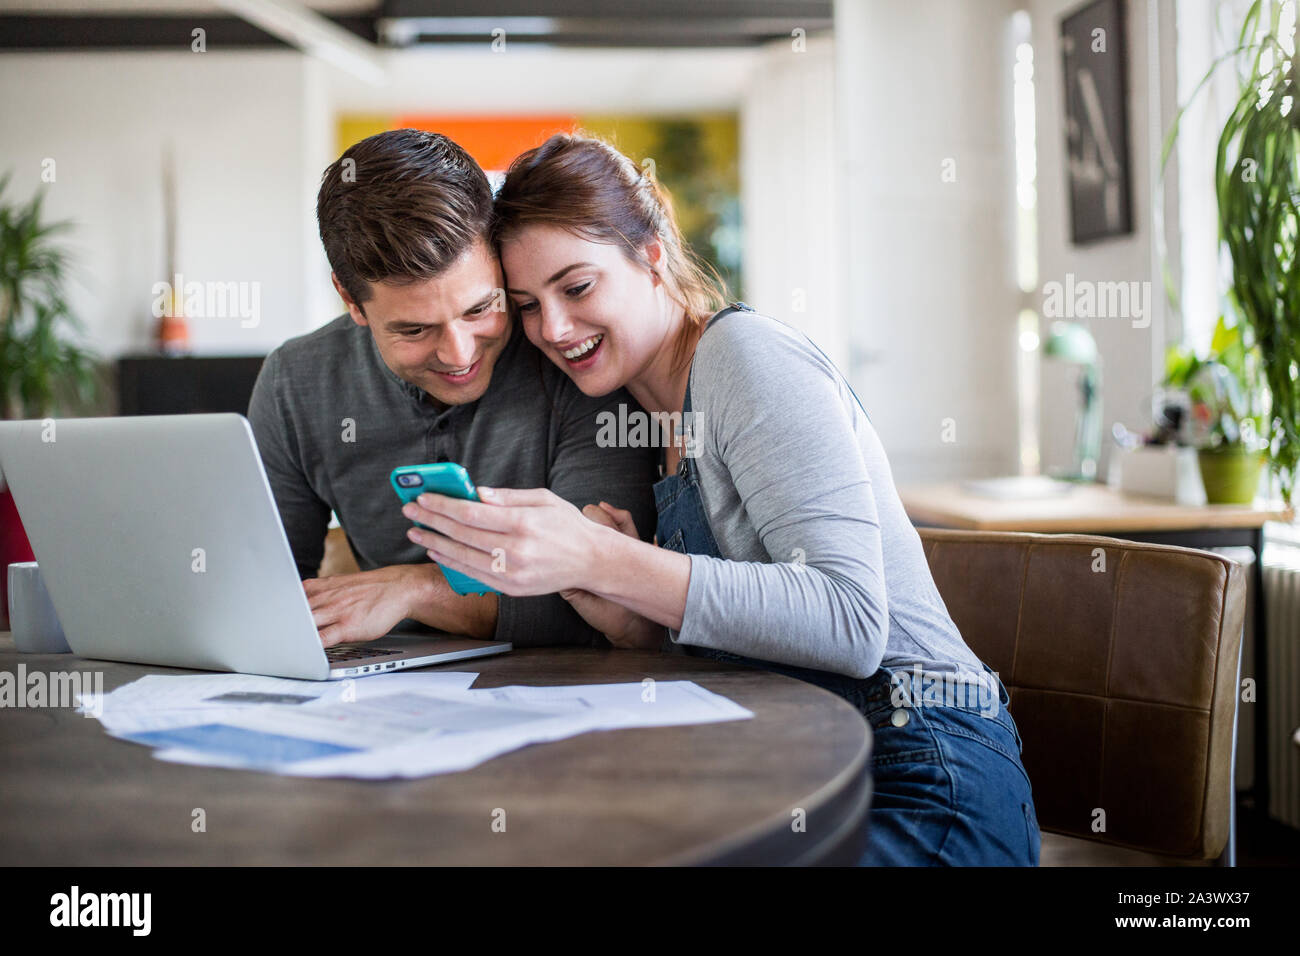 Young adult couple celebrating getting a mortgage together Stock Photo